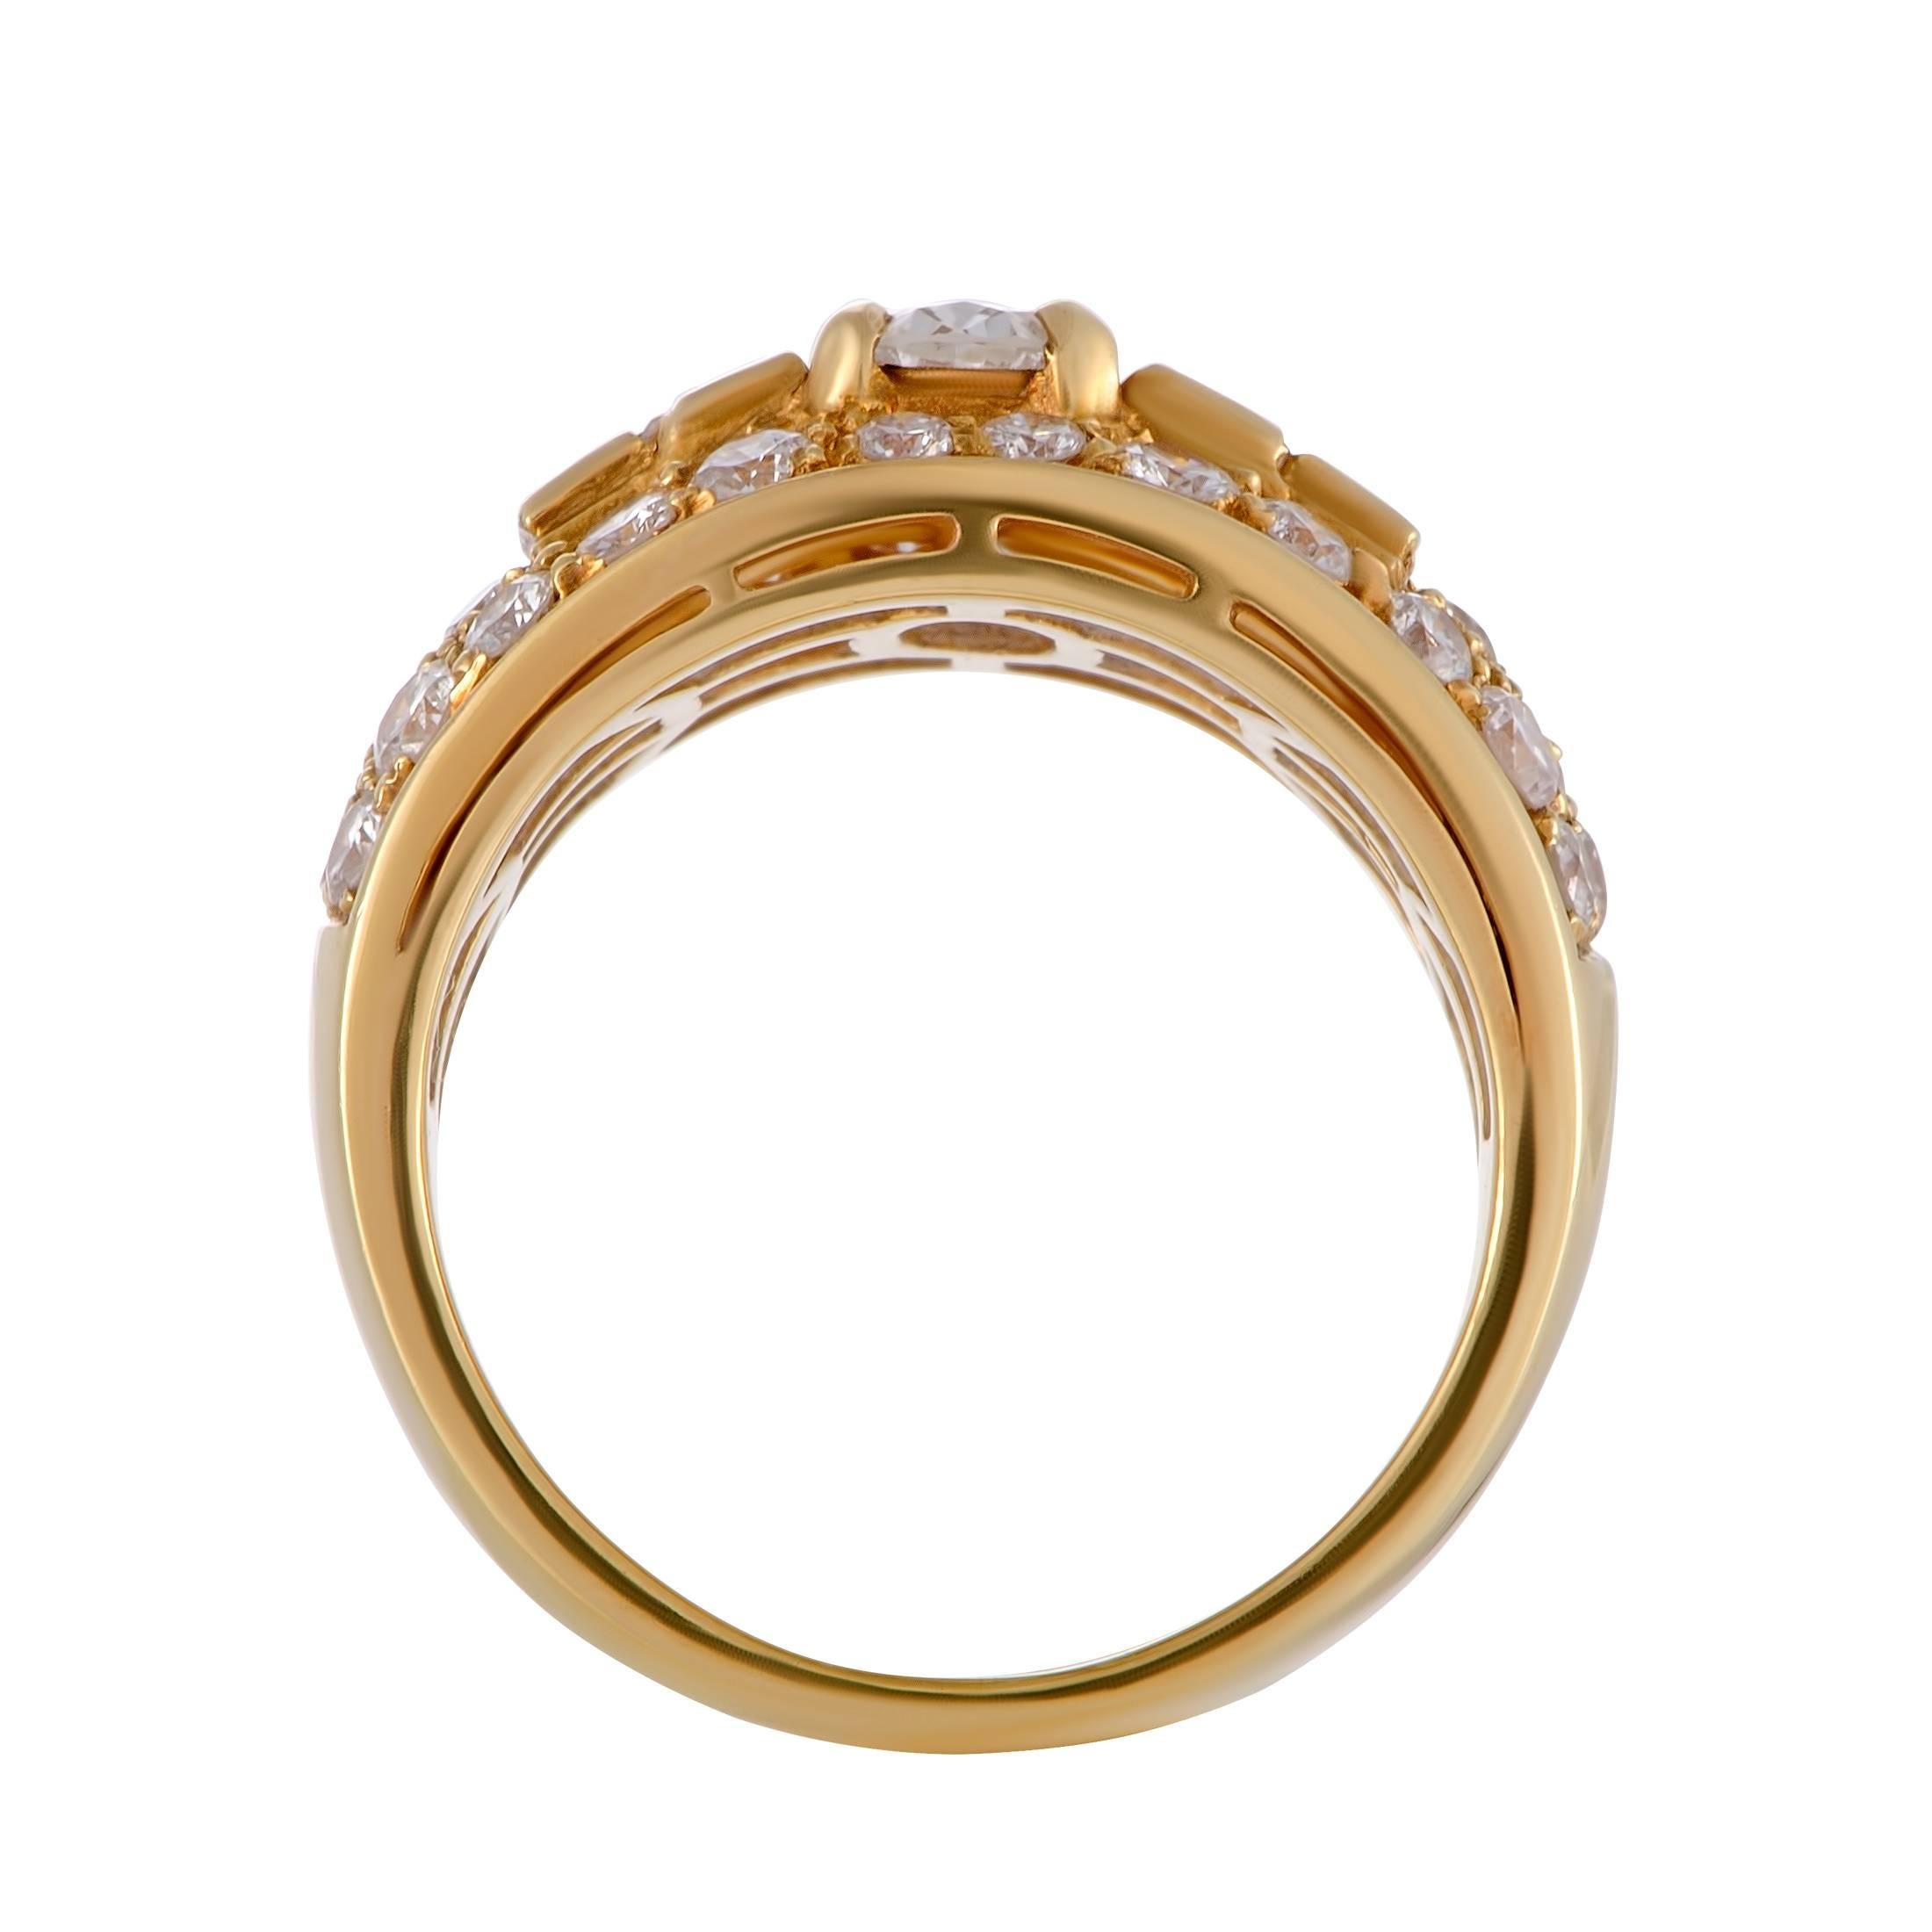 Incredibly refined and opulent at the same time, this stunning ring designed by Bvlgari is made of enchanting 18K yellow gold and embellished with an array of spectacular diamond stones, with the one at the center weighing approximately 0.60 carats